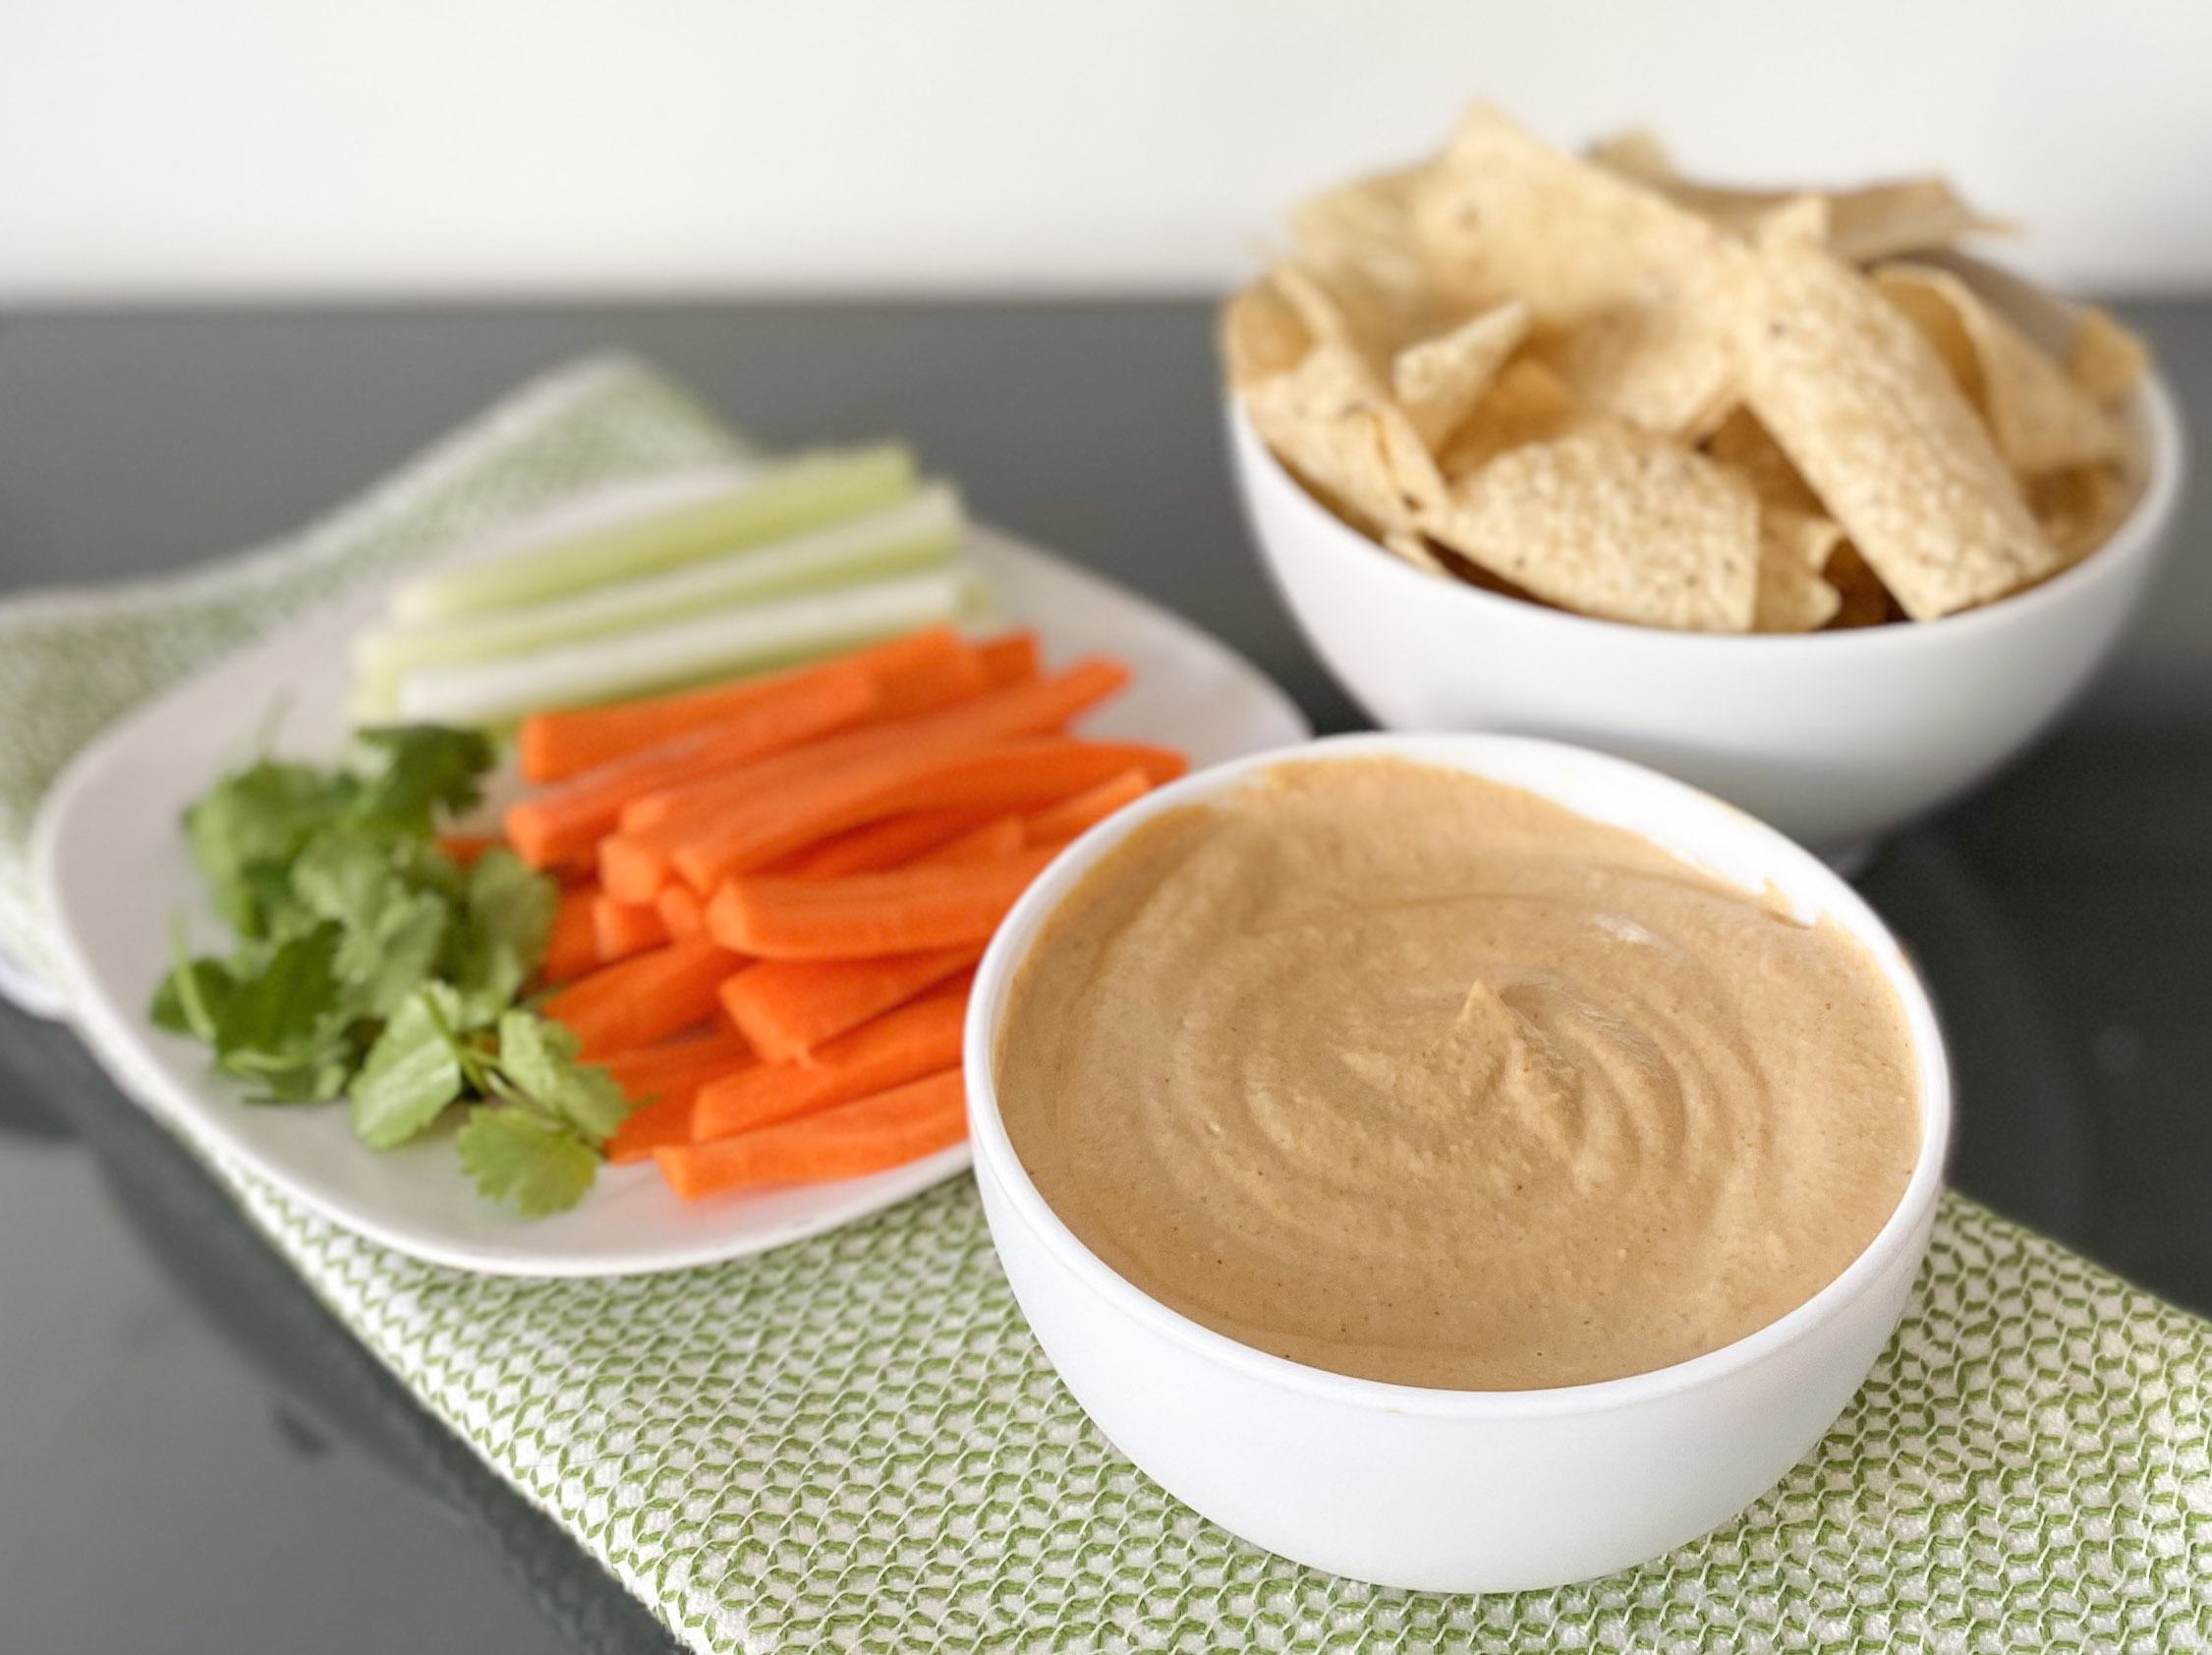 Vegan Nacho Cheese Dip (Simple, Creamy, and Healthy!) - Scones and Scrubs